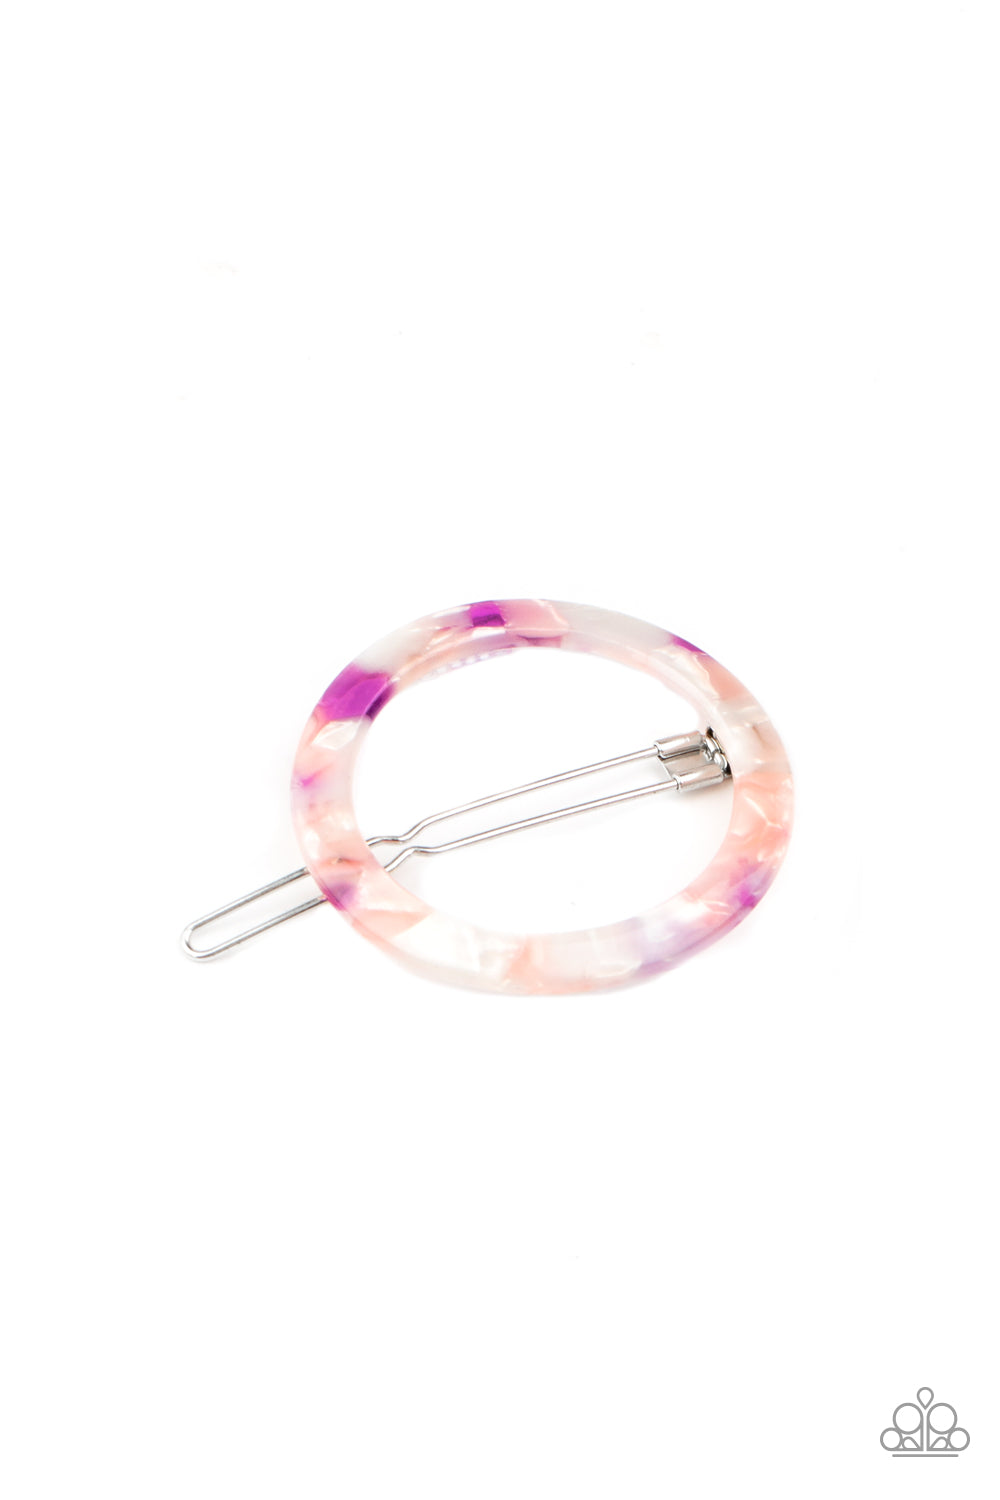 Paparazzi Accessories - In The Round - Purple Hair Clip - Alies Bling Bar